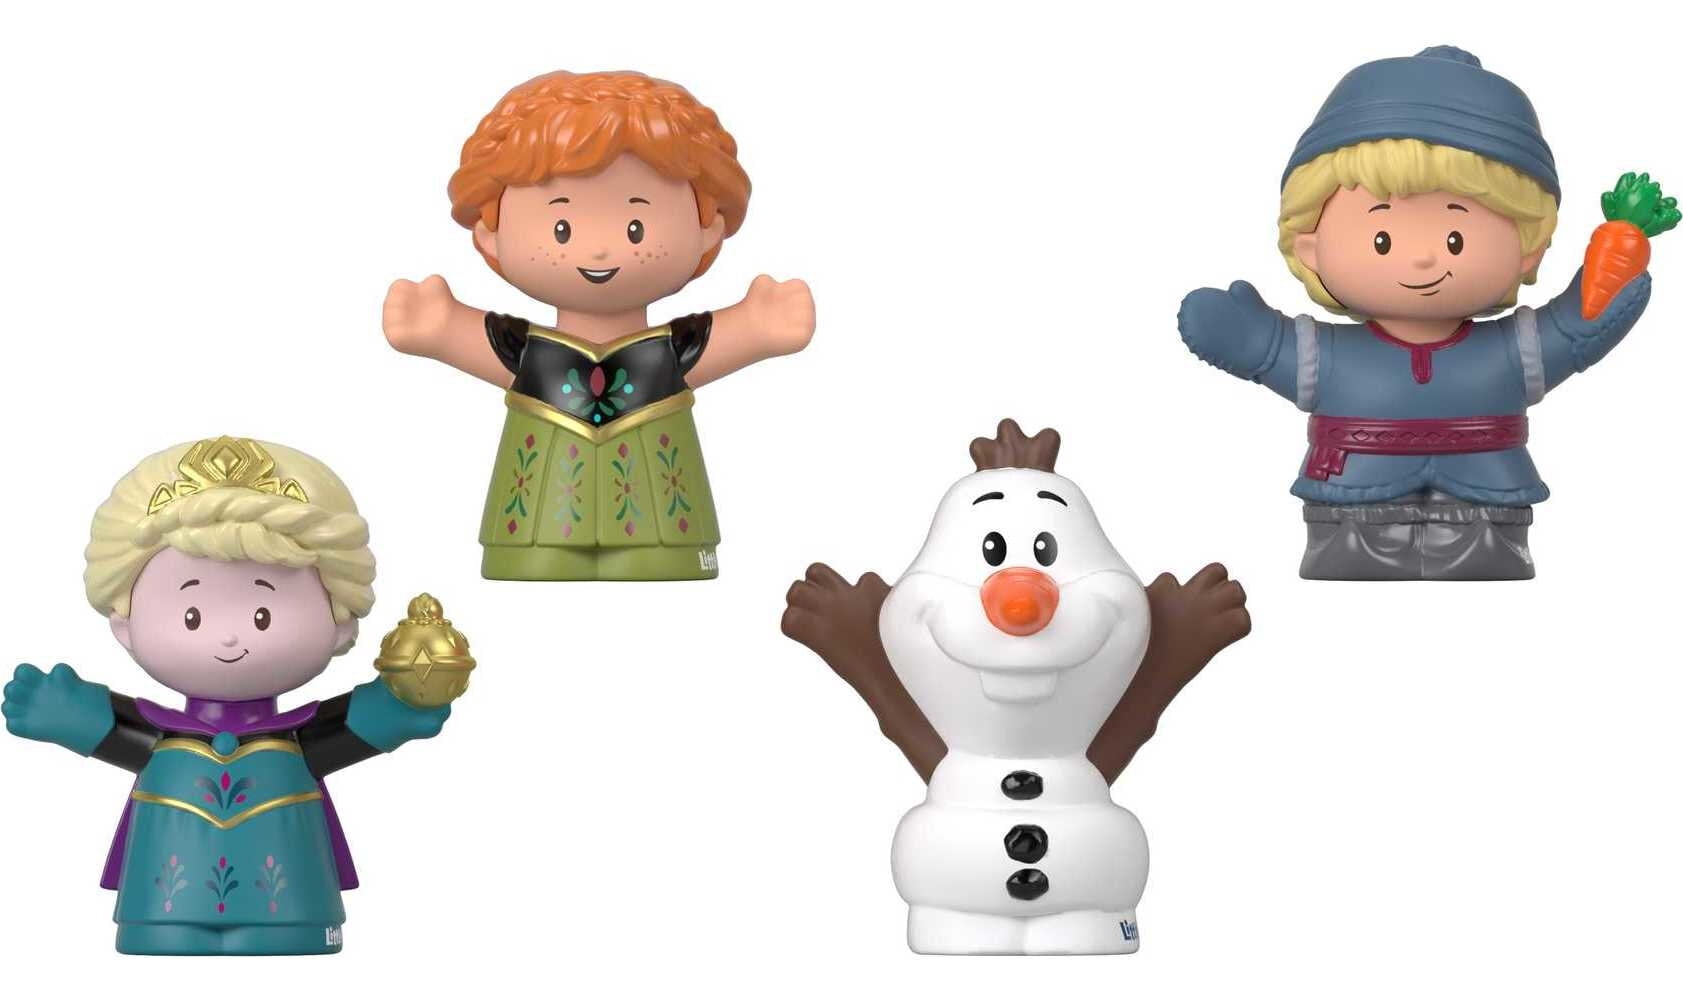 Picture of Fisher-Price GMJ13 Fisher-Price Disney Frozen Elsa & Friends by Little People